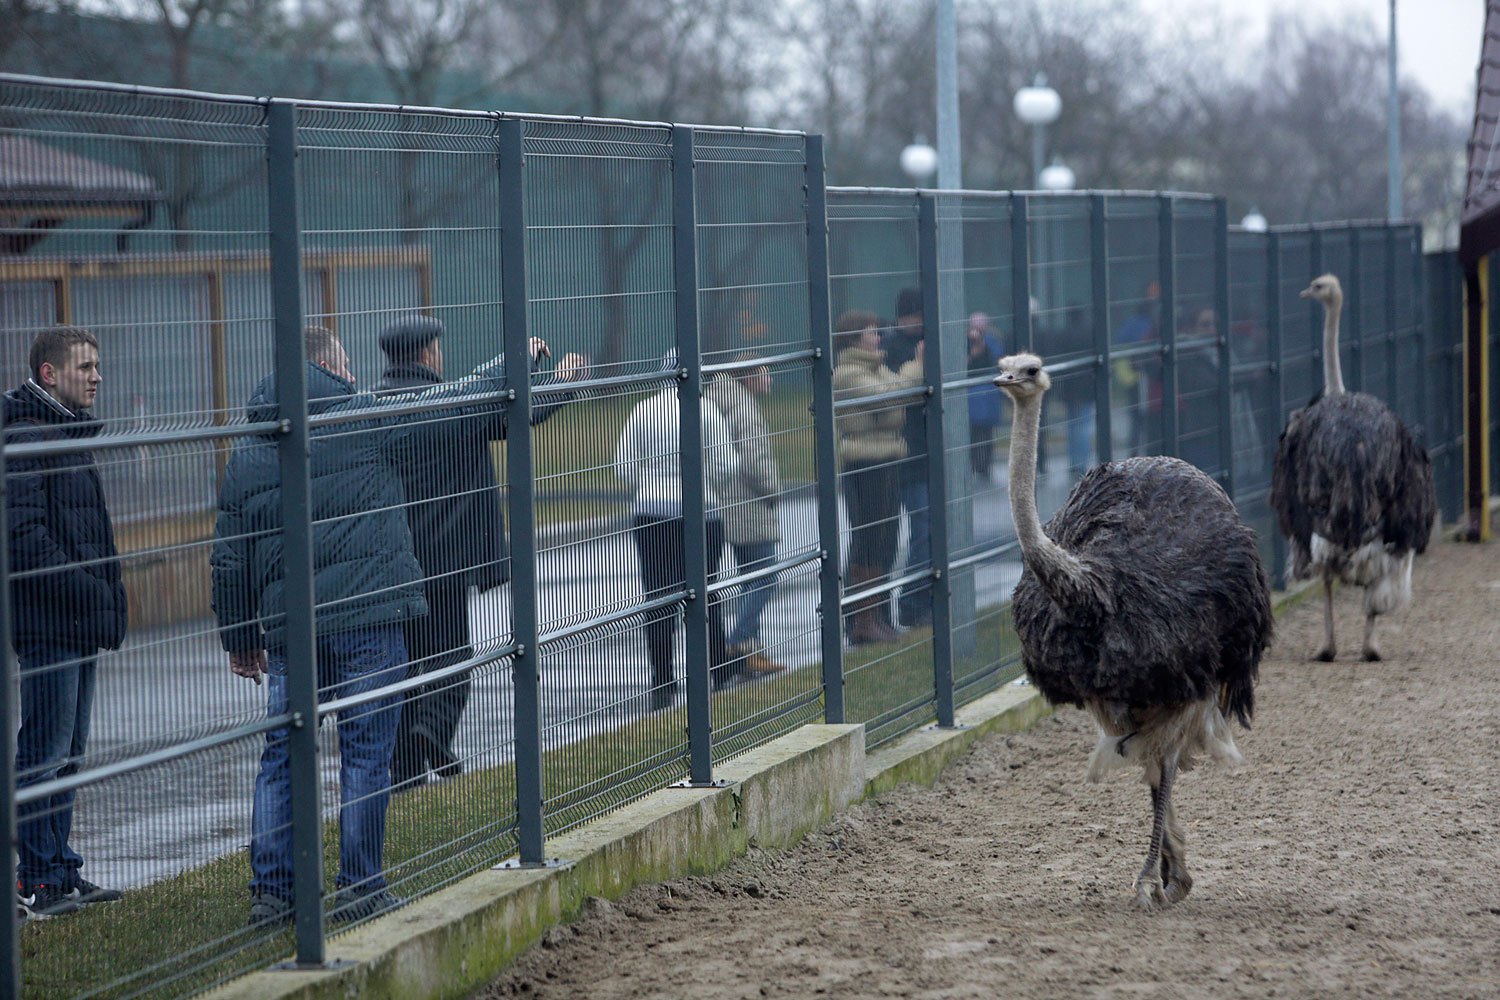 Anti-government protesters and journalists look at ostriches kept within an enclosure on the grounds of the Mezhyhirya residence of Ukraine's President Viktor Yanukovich.